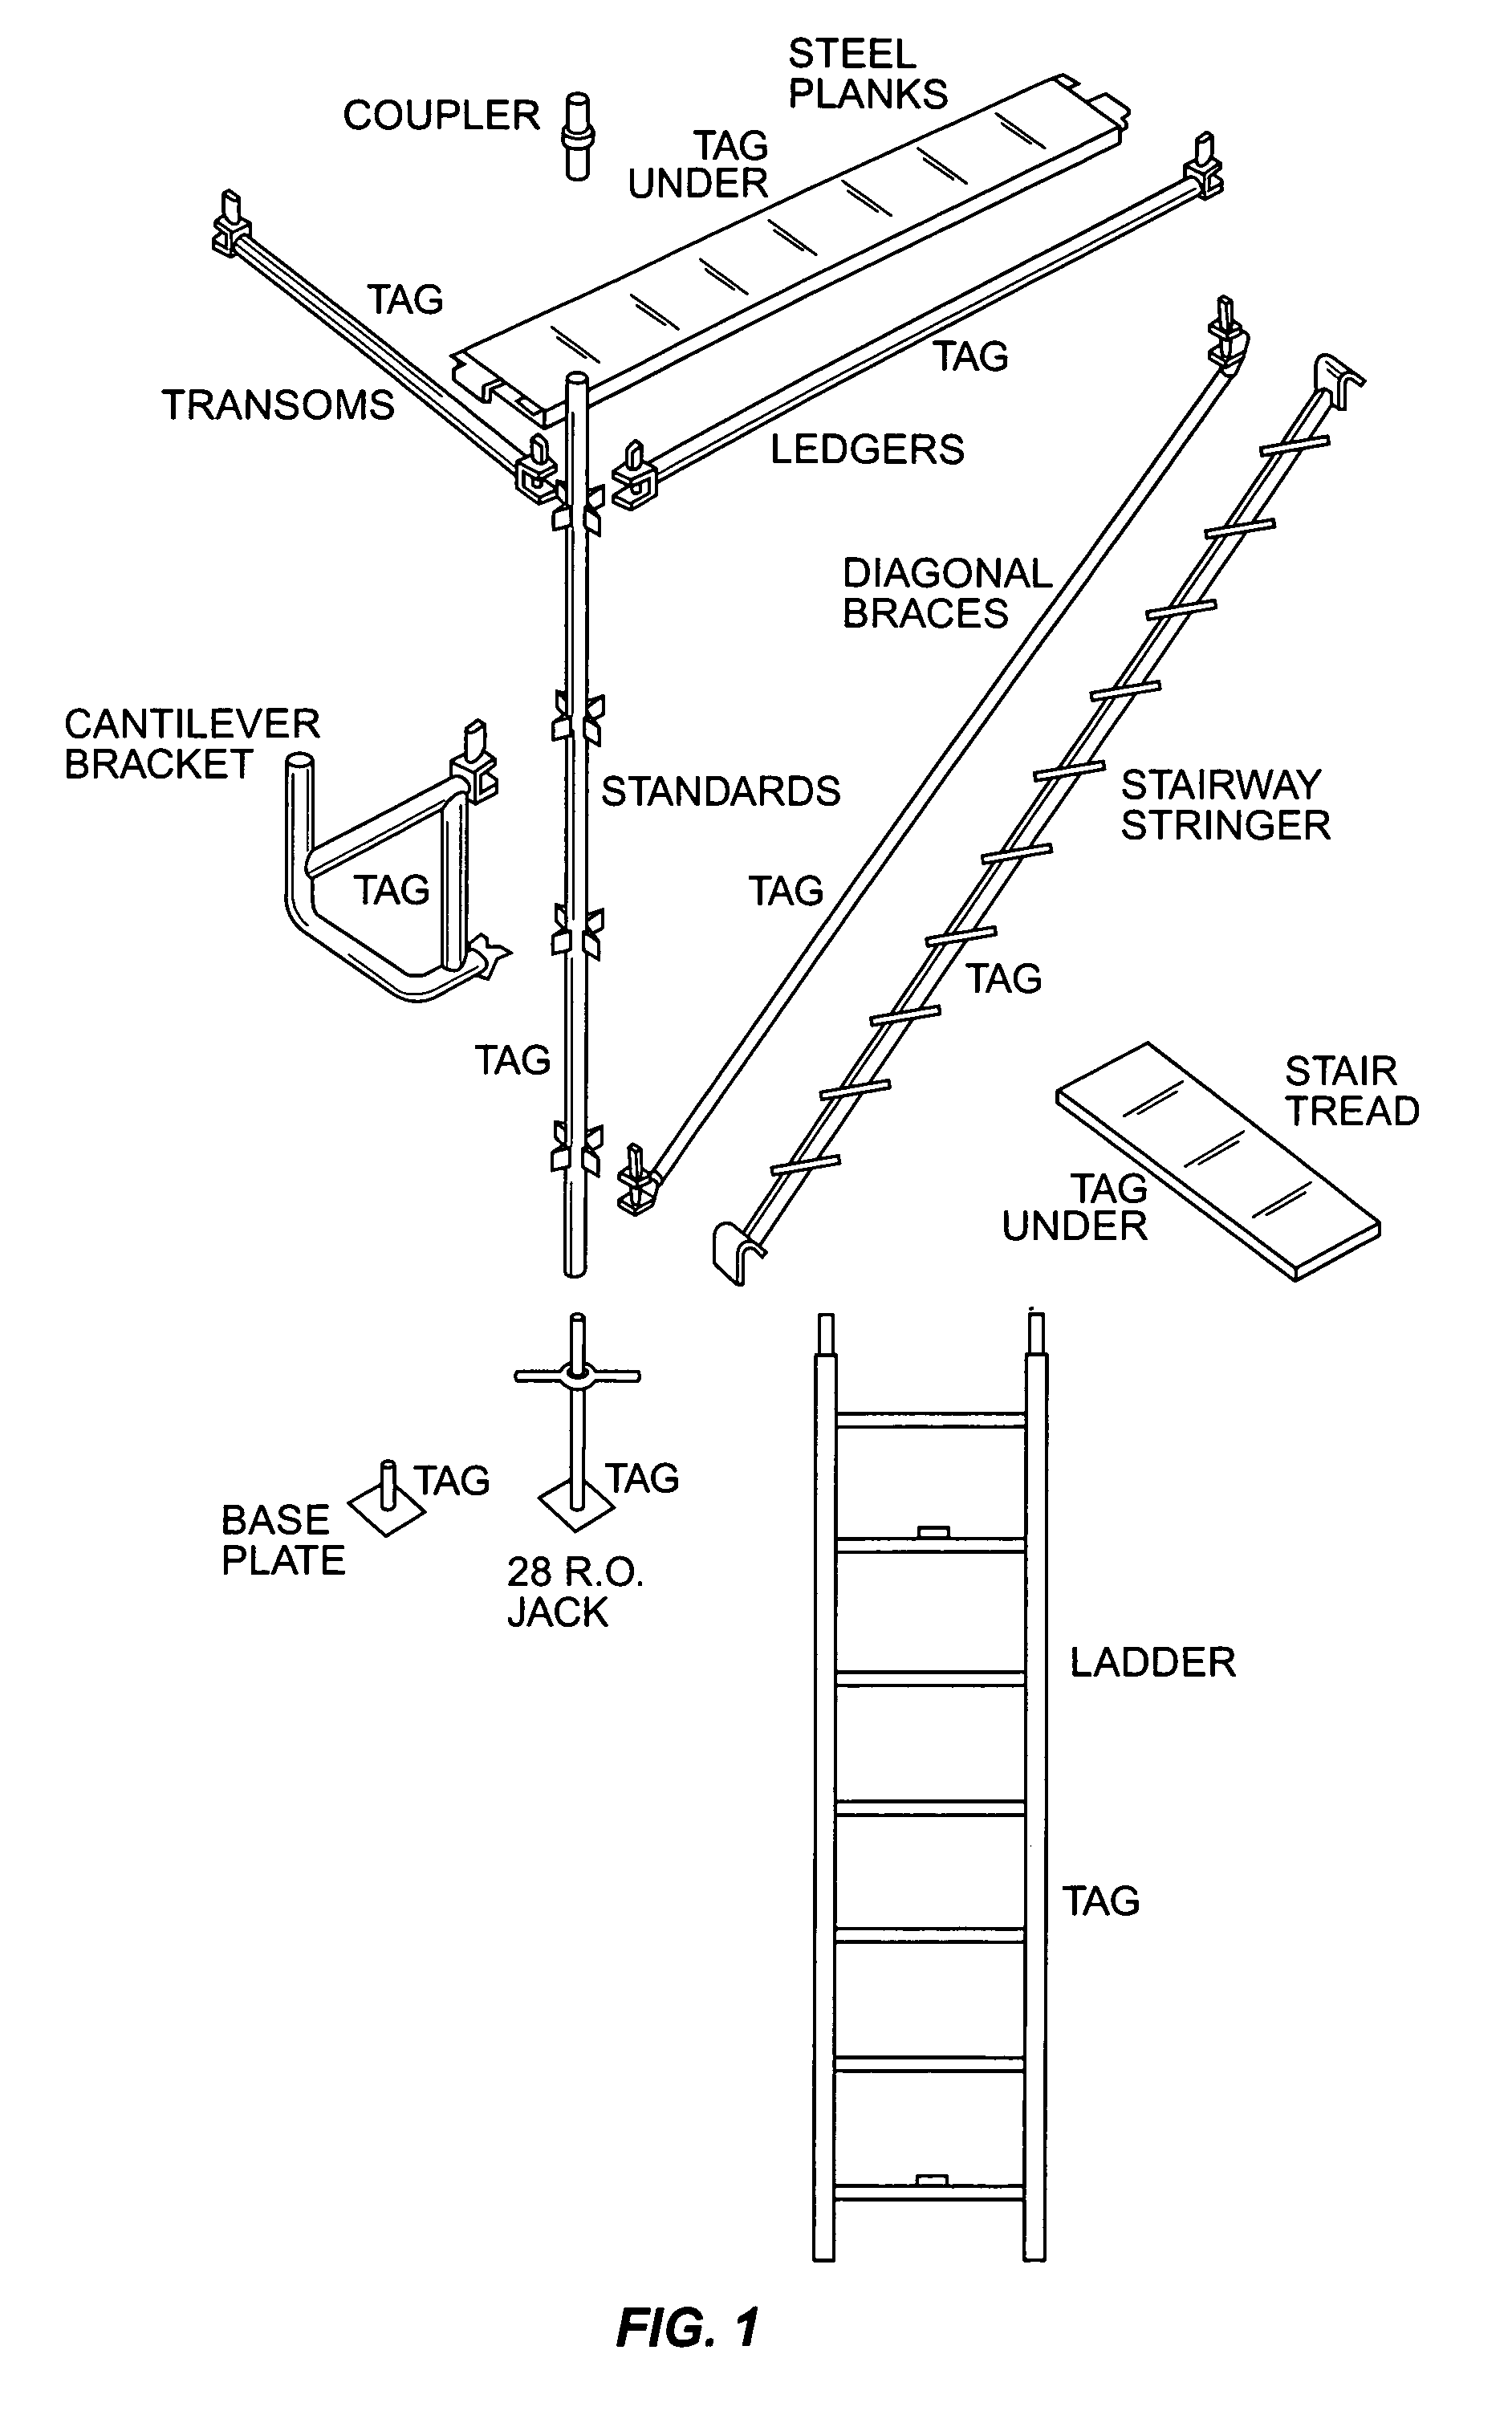 Intelligent reader system and method for identifying and tracking goods and materials transported in pallets, including but not limited to scaffolding materials